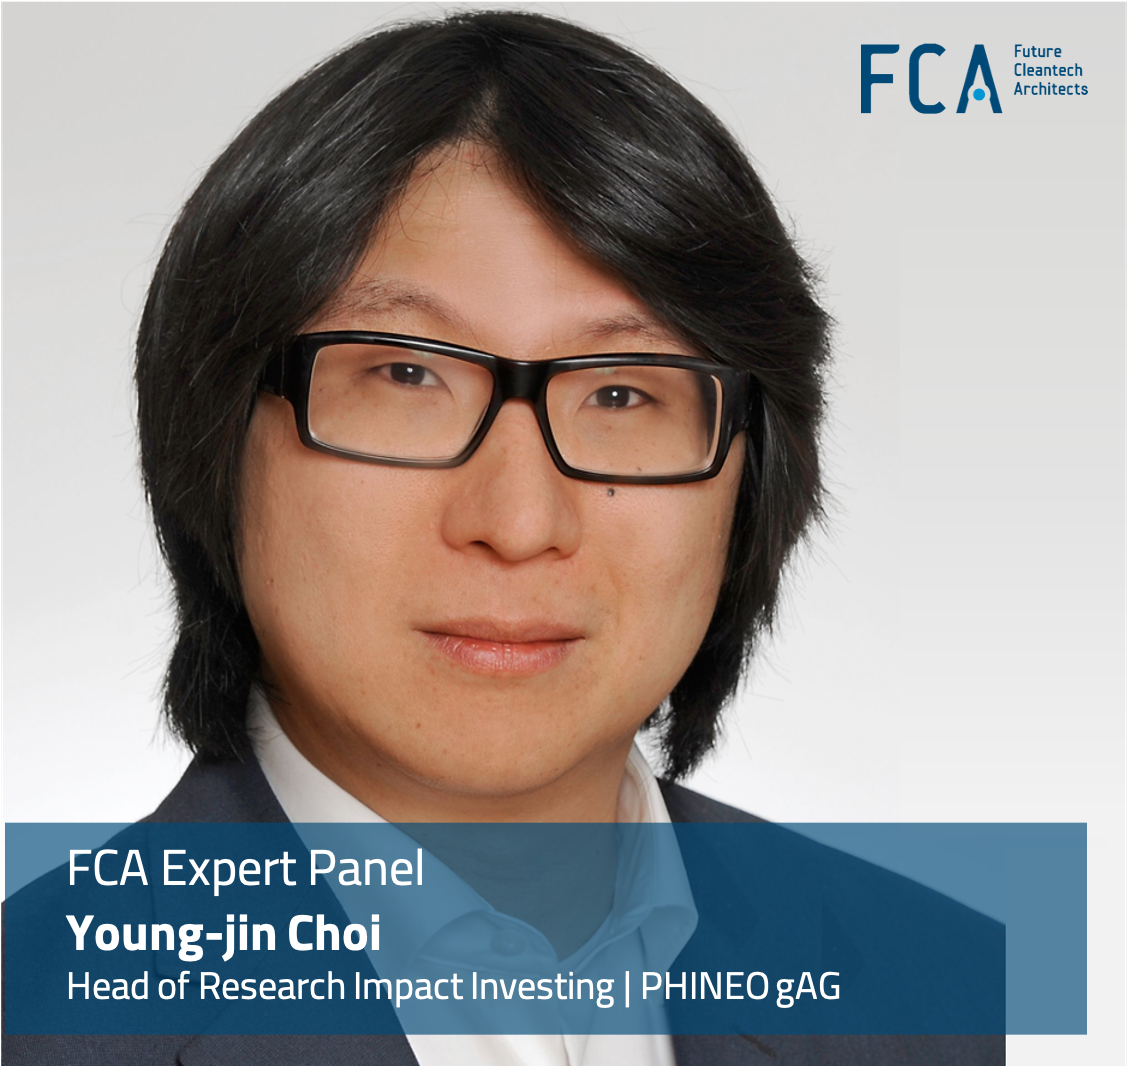 Meet the Expert Panel’s newest addition, Young-Jin Choi!